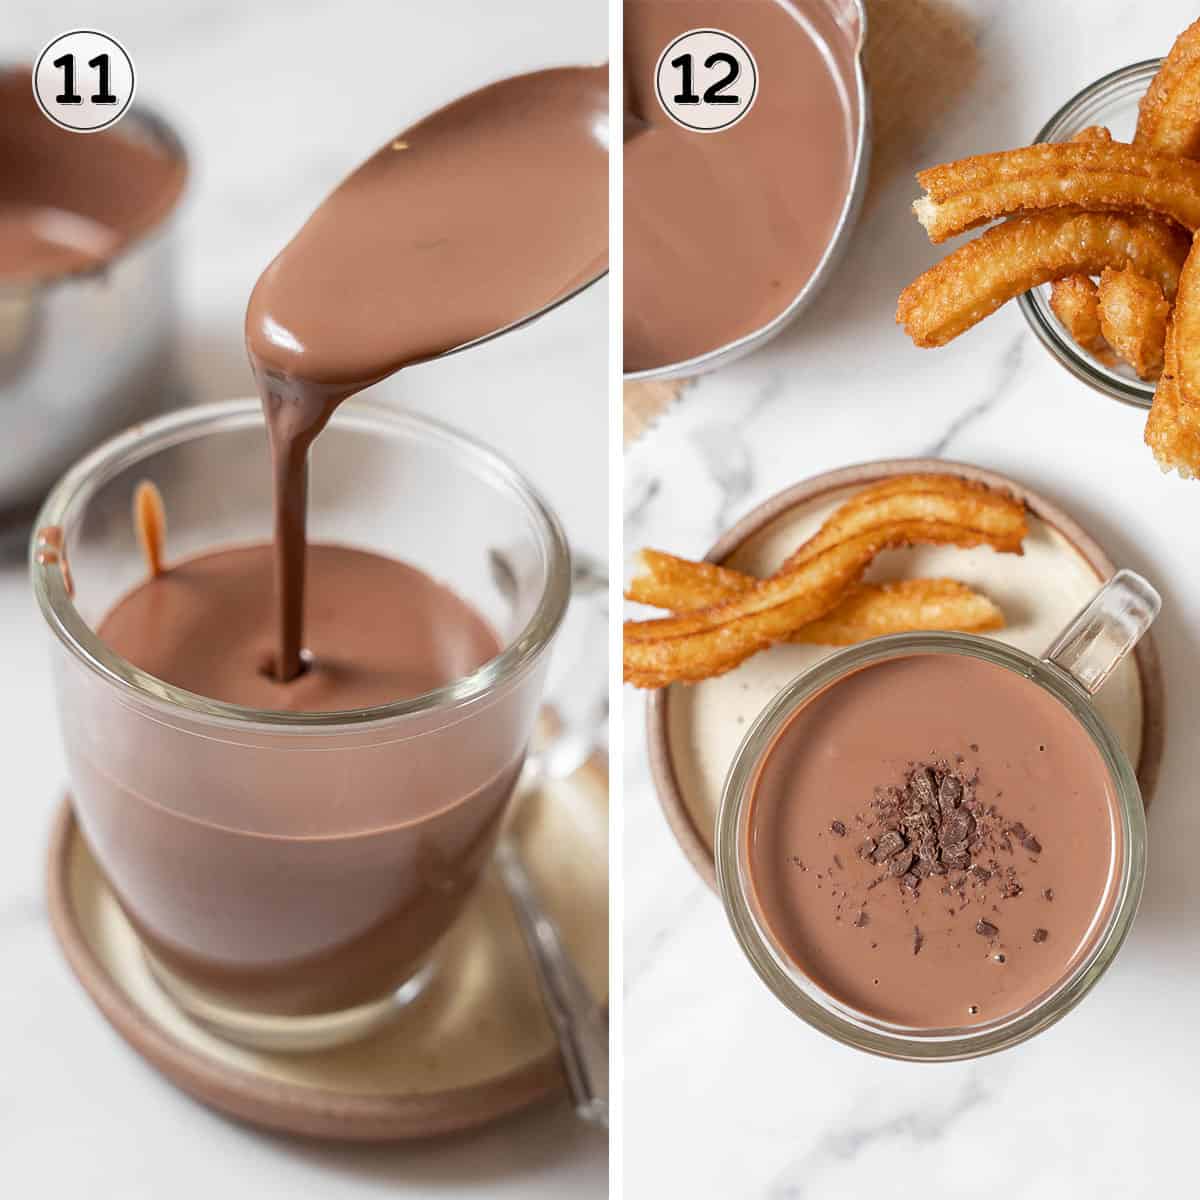 spooning the chocolate into a cup and serving with churros.